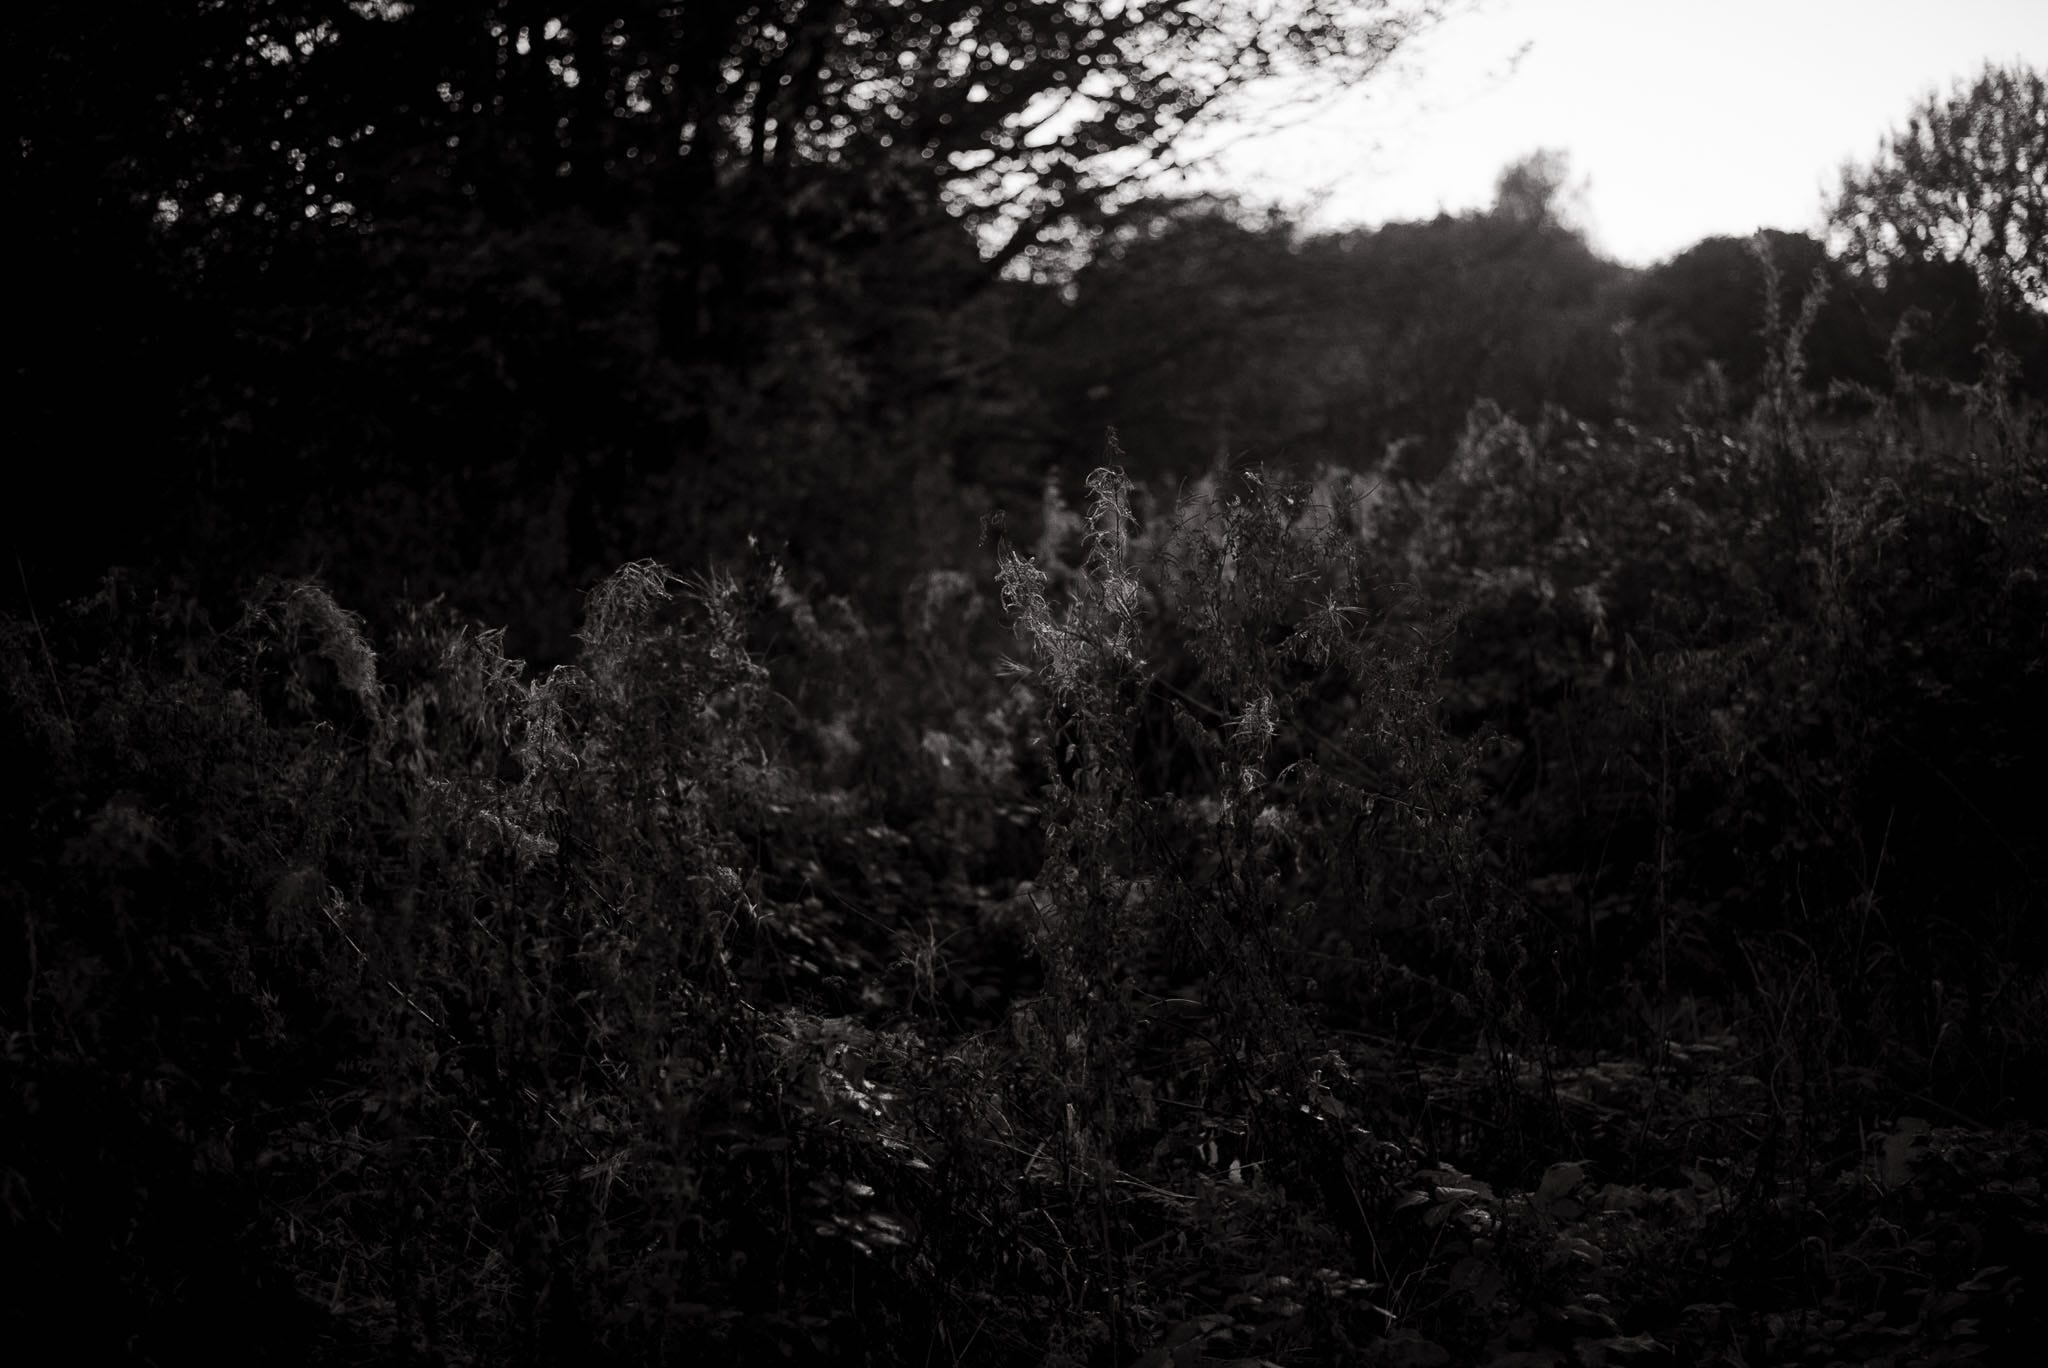 Backlit tall grass stands in a dark moody forest environment.